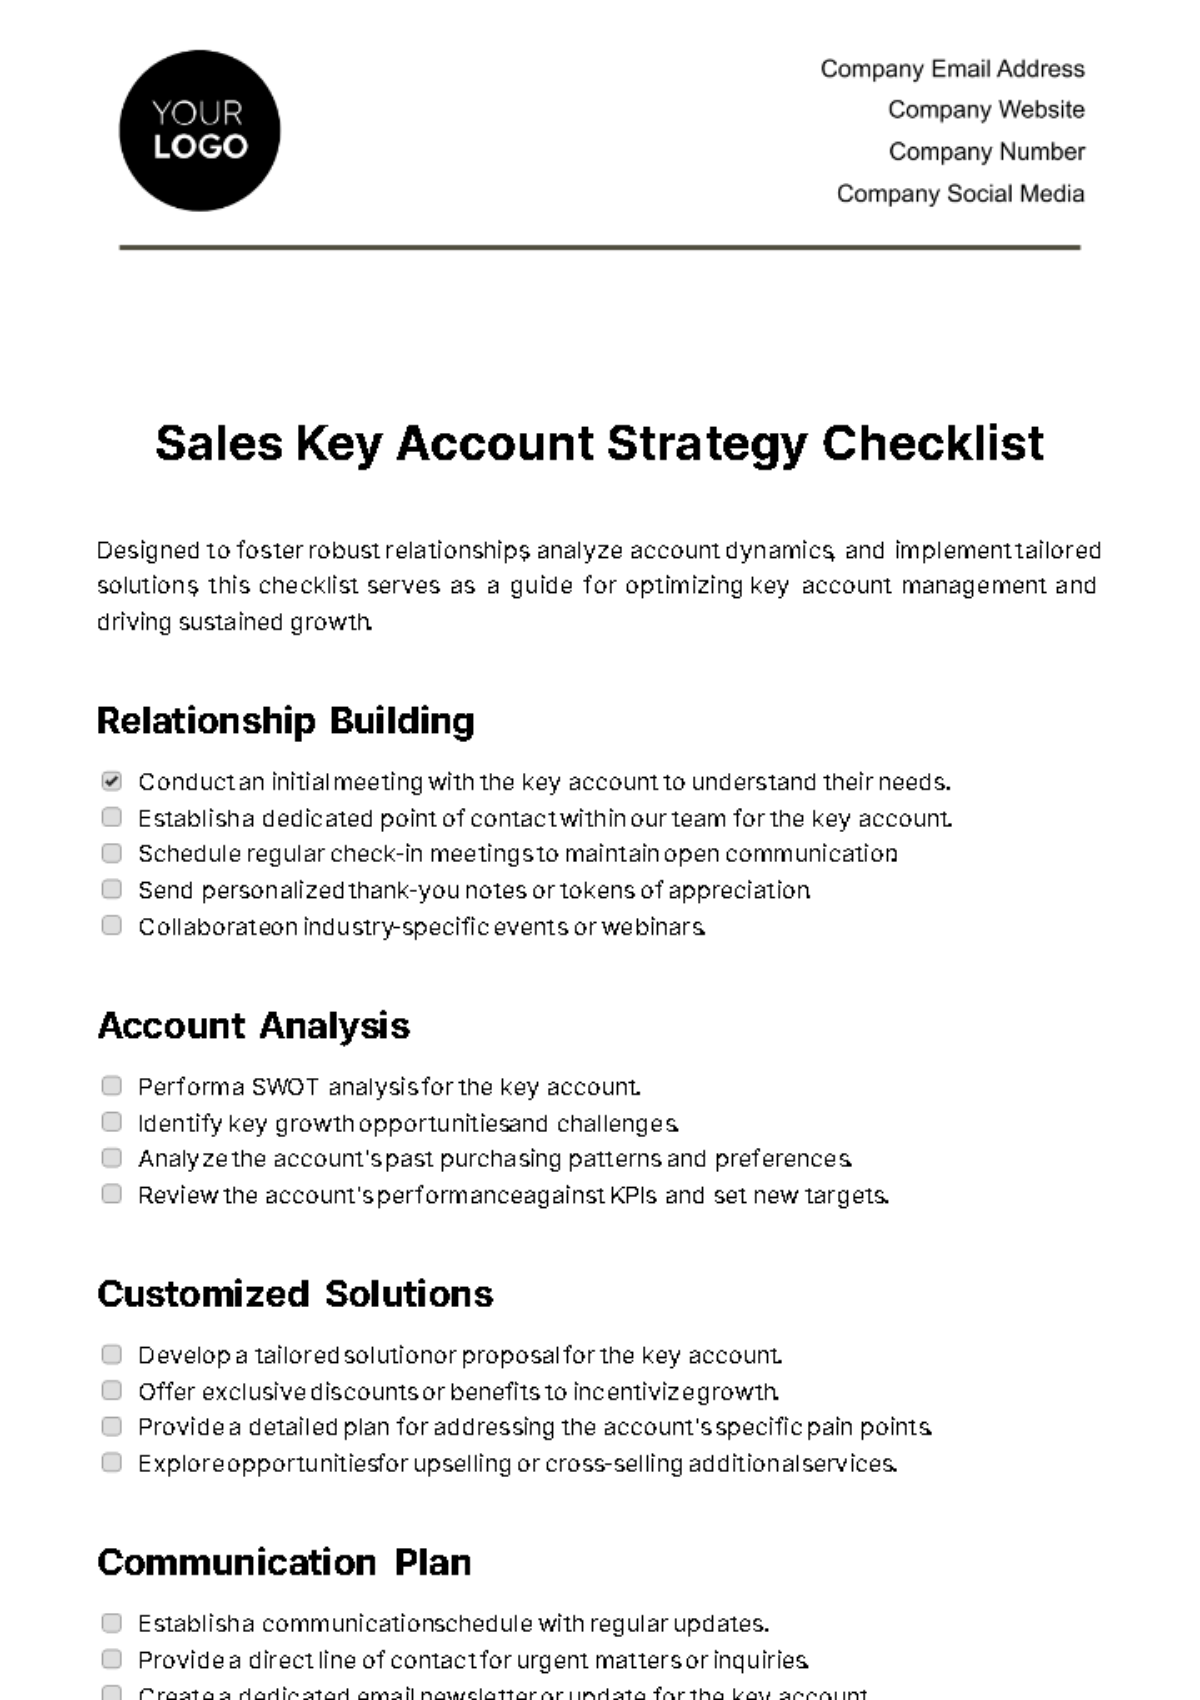 Sales Key Account Strategy Checklist Template